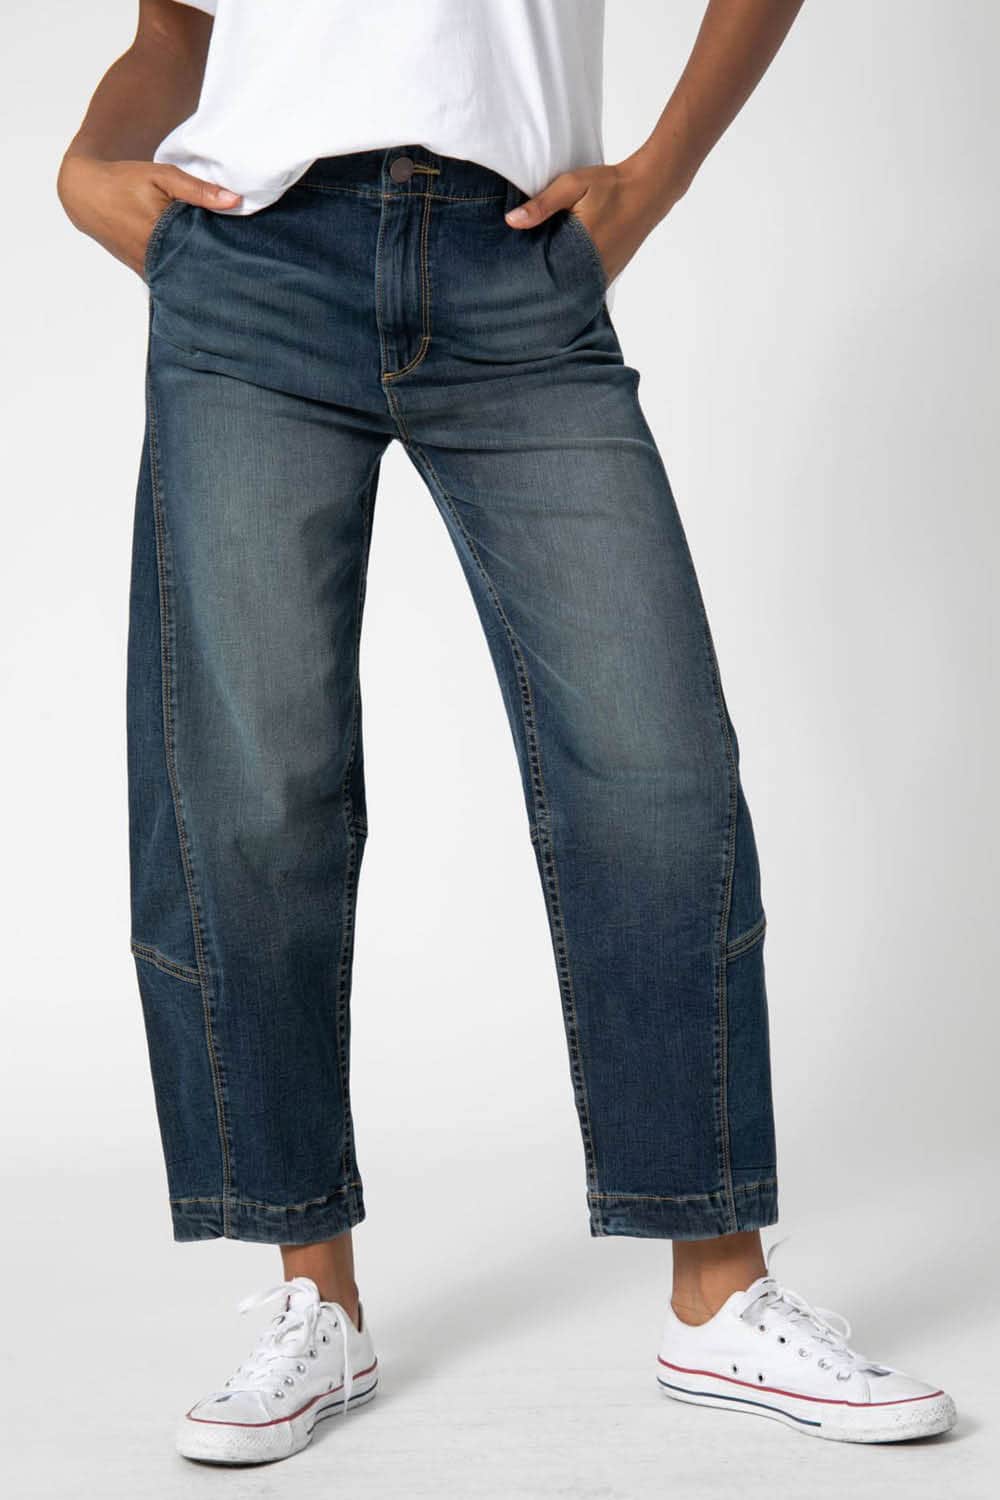 Guide To What's Trending In Denim - the barrel cut jeans